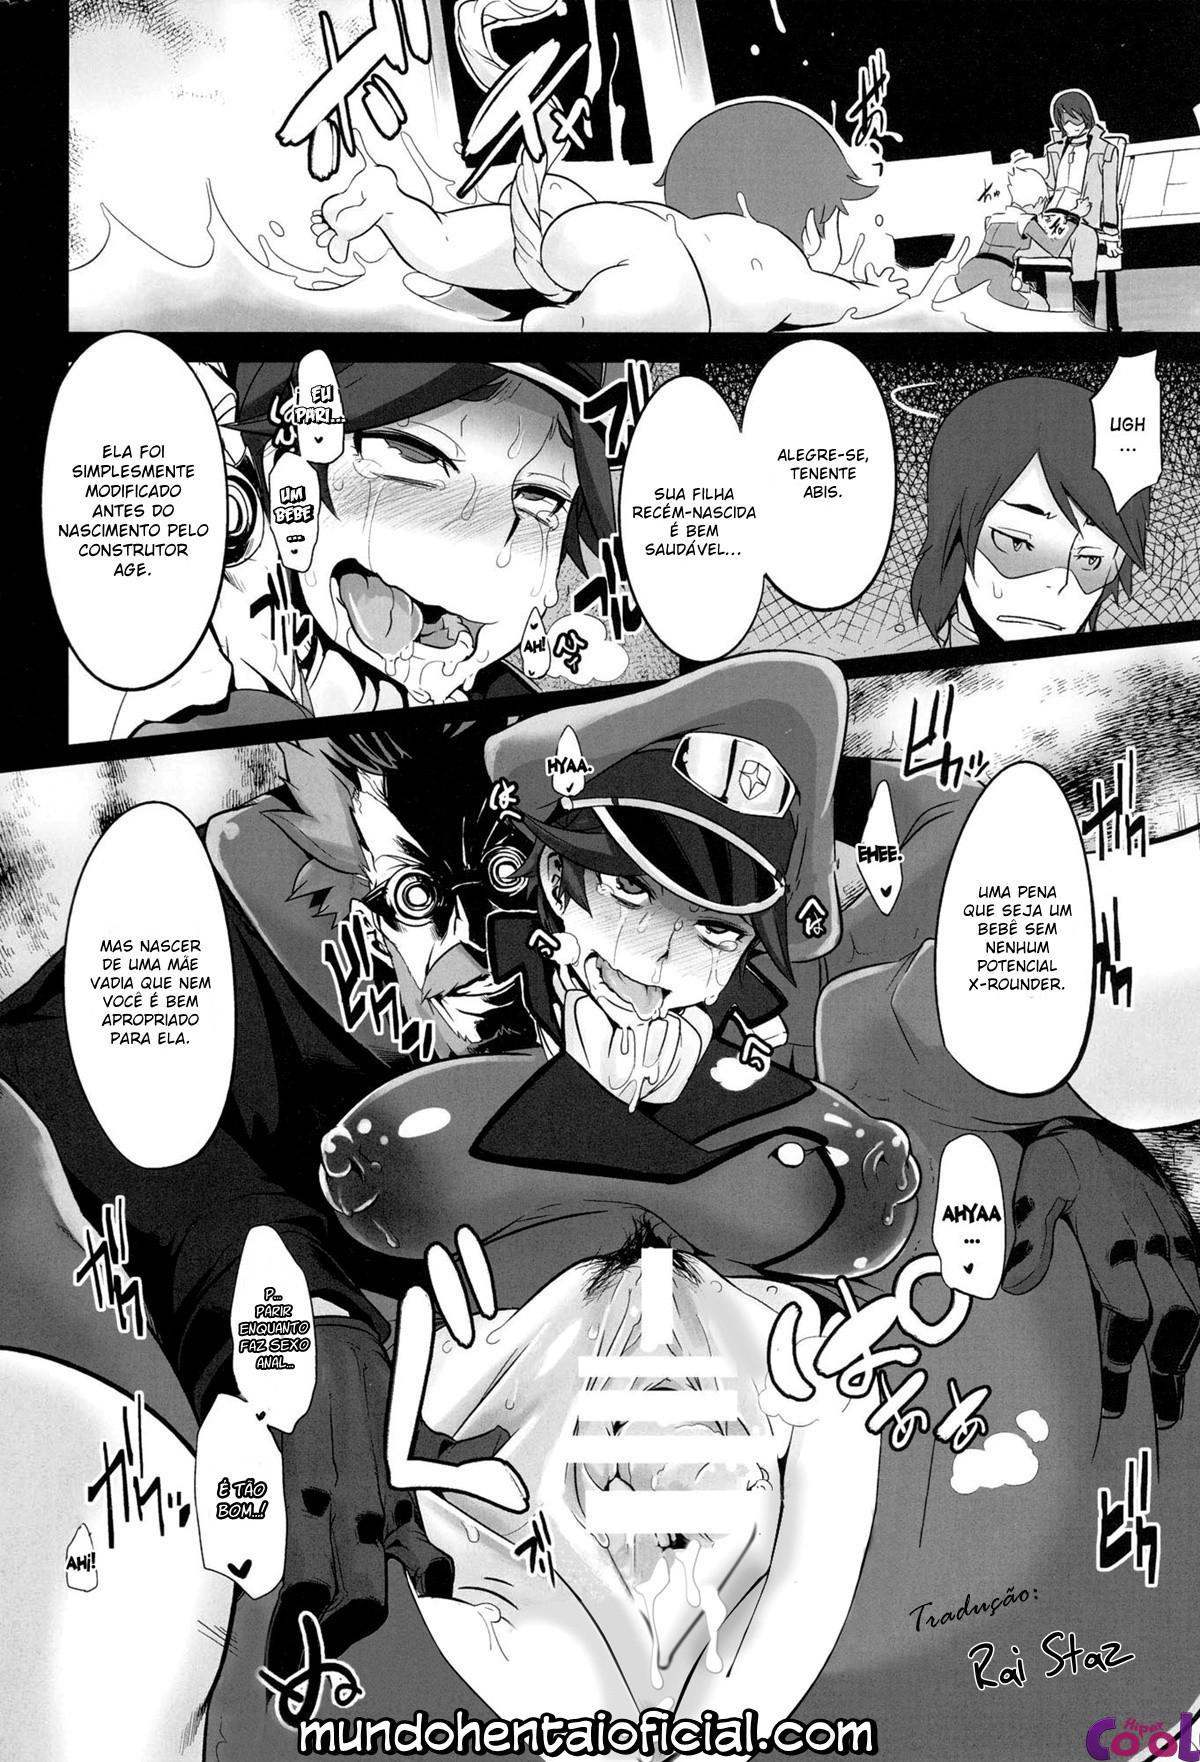 dame-kanchou-or-useless-captain-chapter-01-page-29.jpg